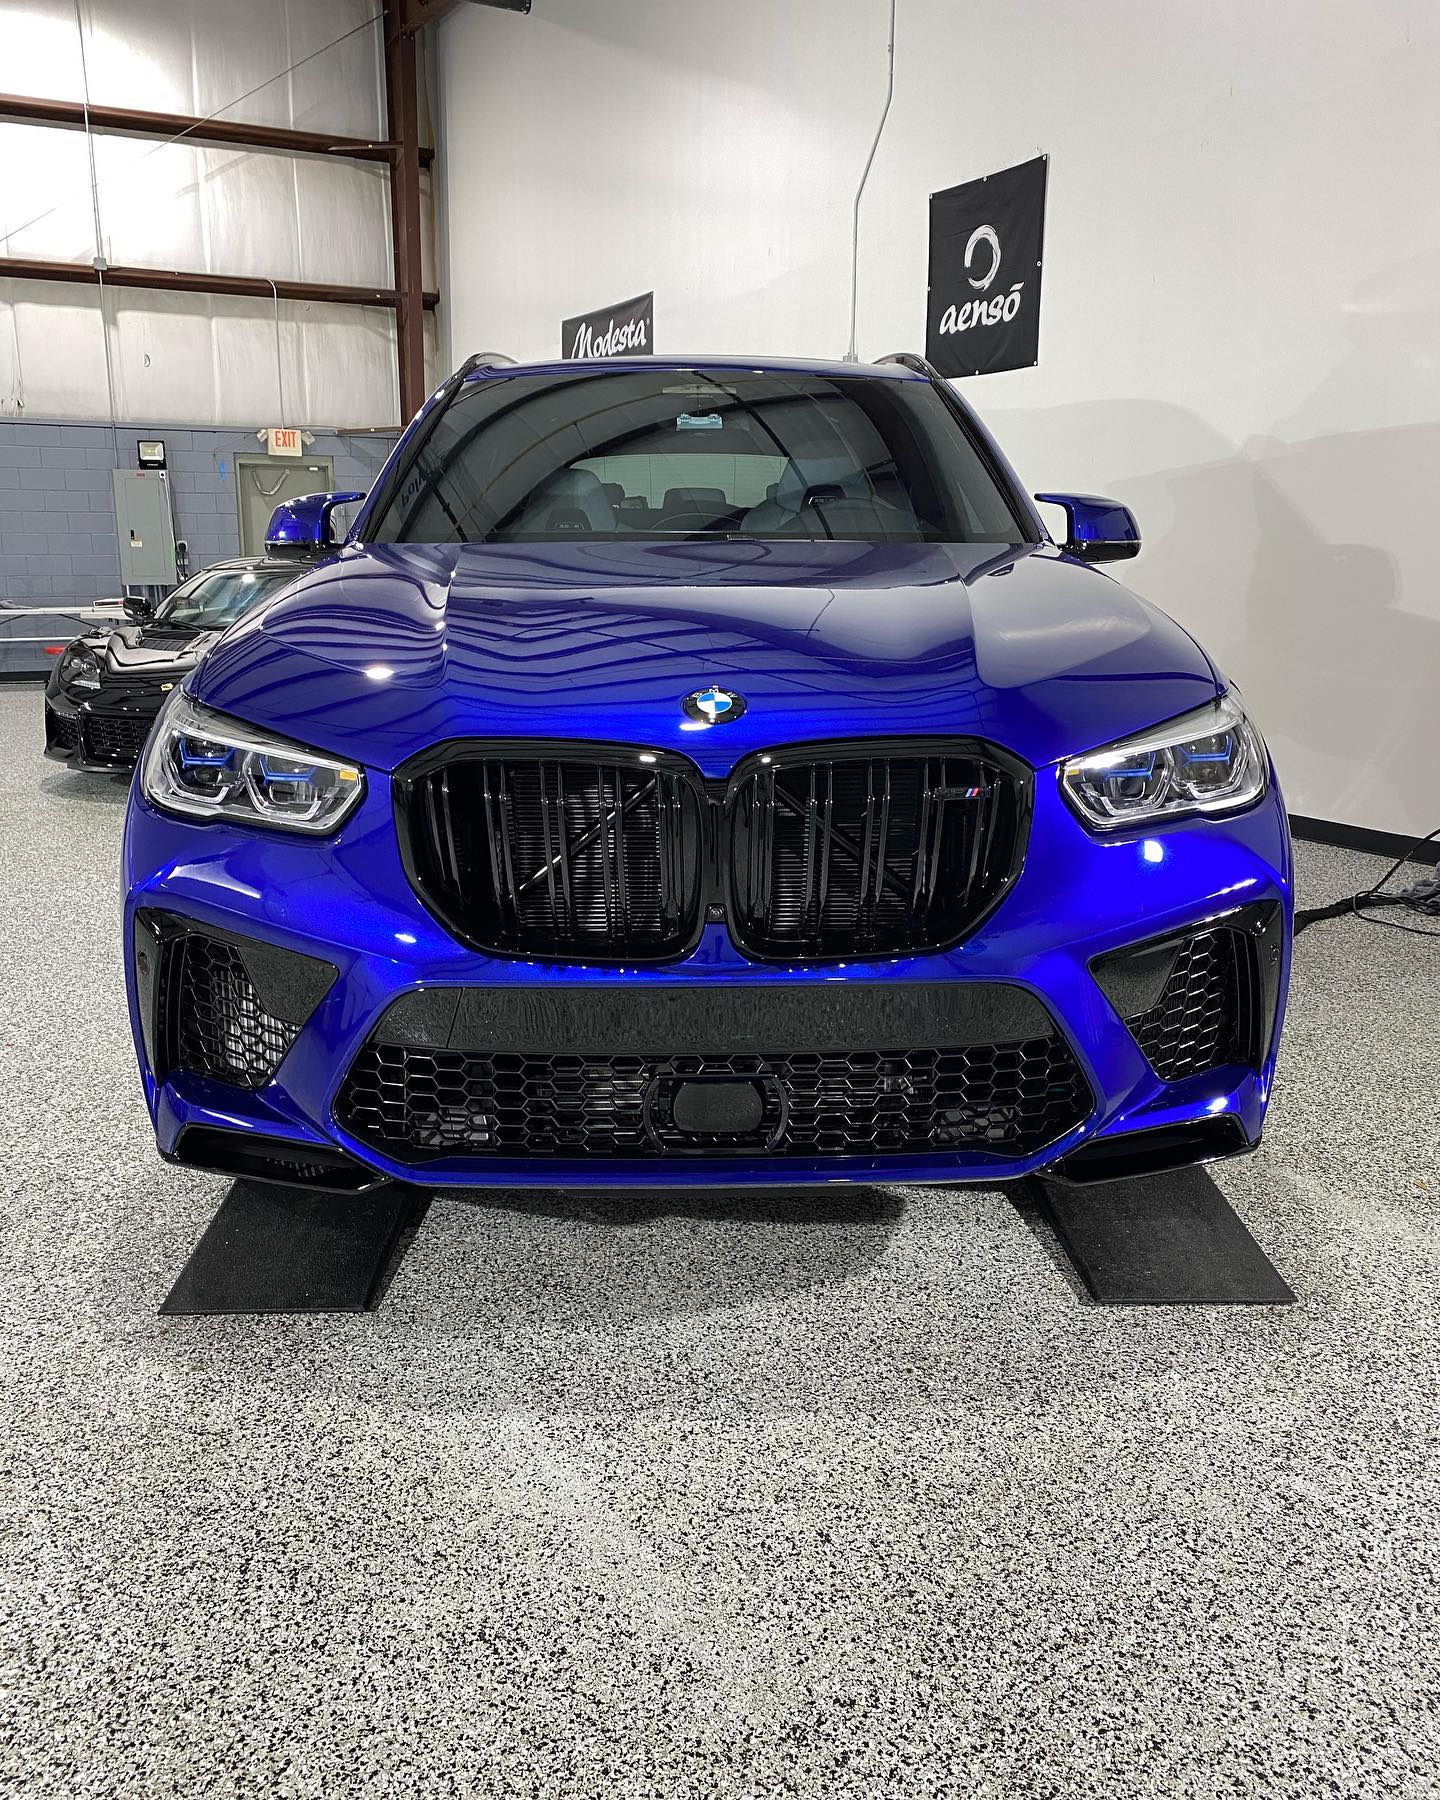 It’s M/// Monday! No more rock chips! Marina Bay blue @bmw X5 Competition front bumper protected w/ @xpel. Properly detailed, this color can really glow! 😍 #Superiordetailer #sododistrict #bmw #x5m #x5mcompetition #marinabayblue #xpelultimateplus  #clearbra #ppf